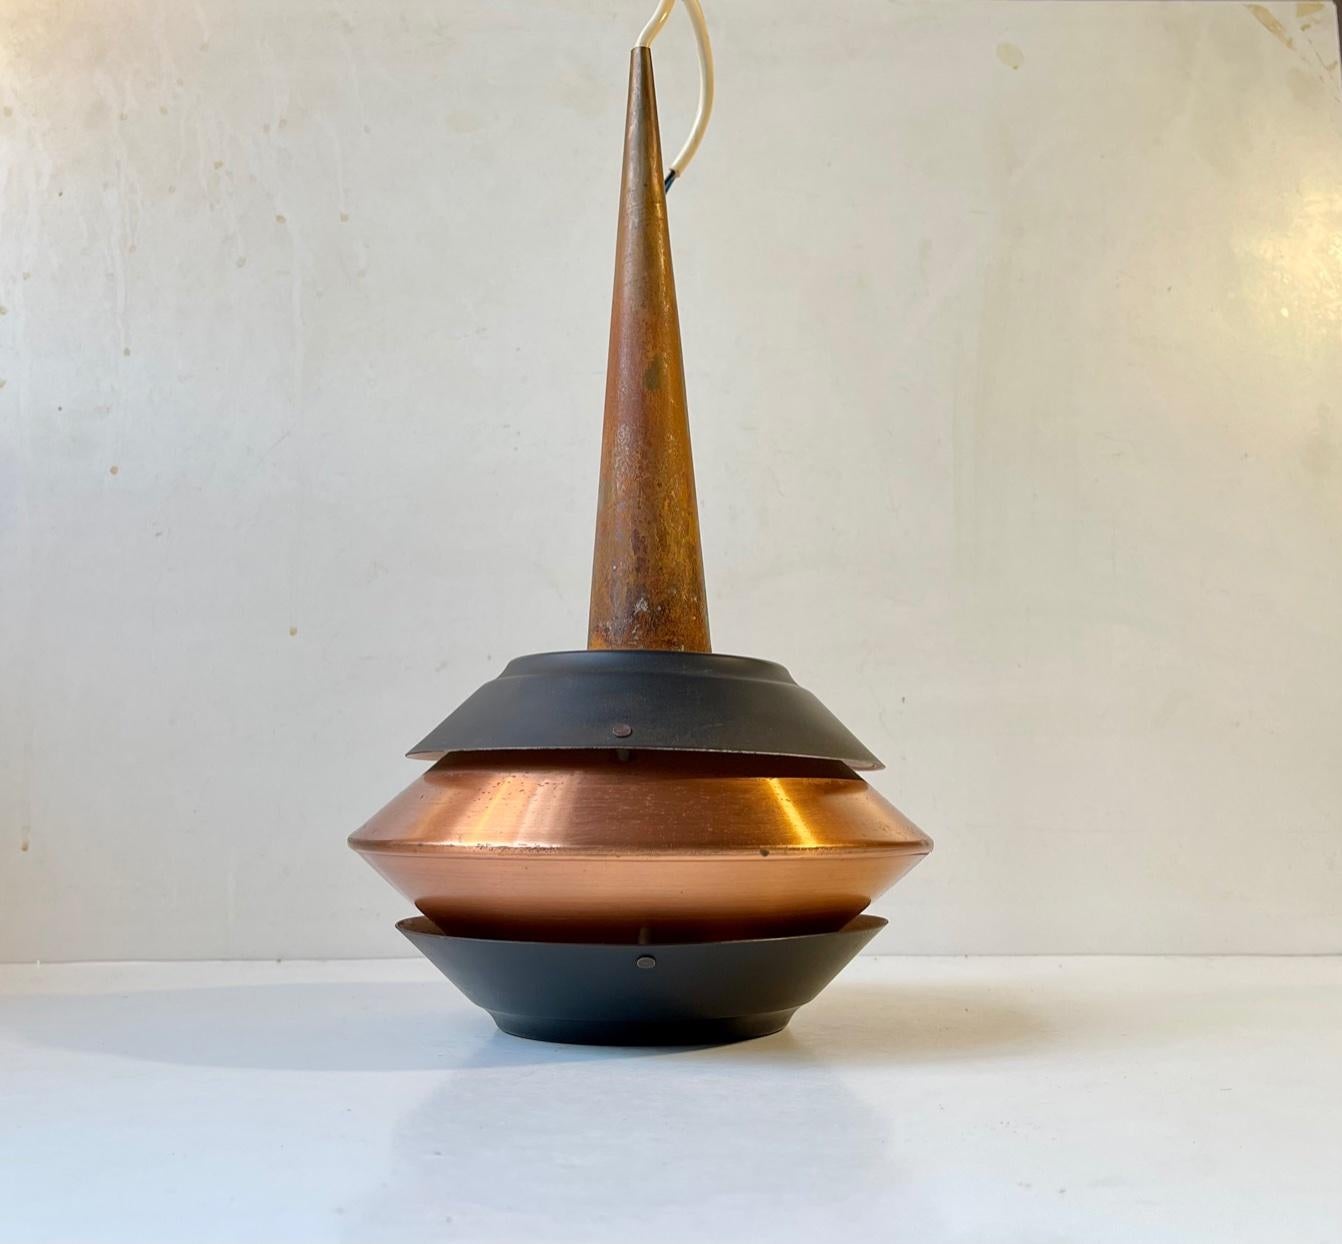 Small slender Stilnovo inspired pendant lamp. Made from partially black painted and patinated copper. The top is very patinated and shows the color of brass to the pointy top. It was Manufactured by Ernest Voss in Denmark during the early to mid